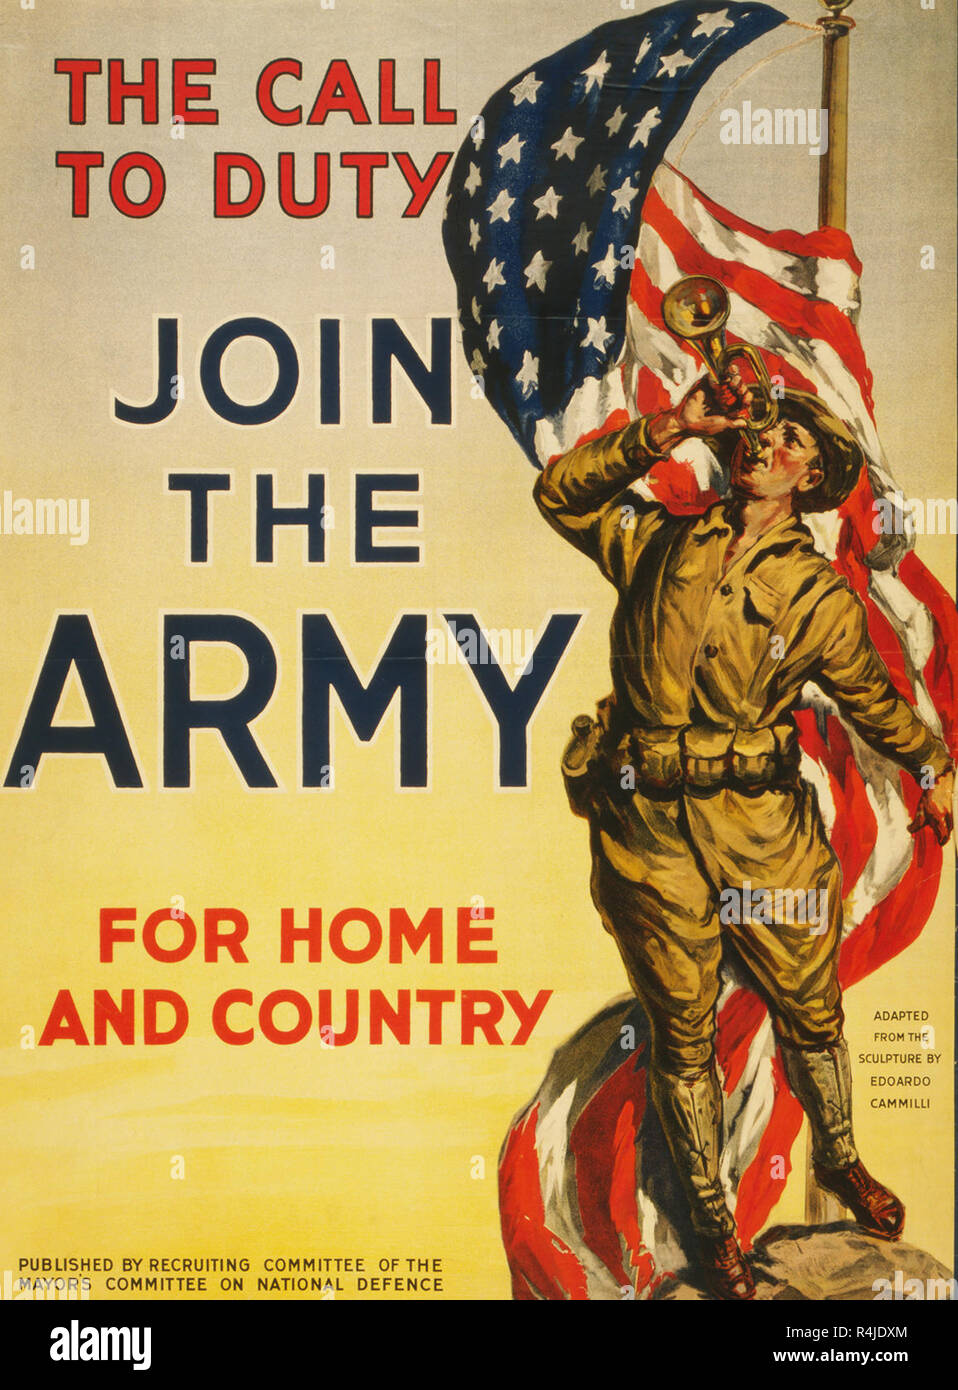 Join the Army The Call to Duty for Home and Country American First World War propaganda poster Stock Photo